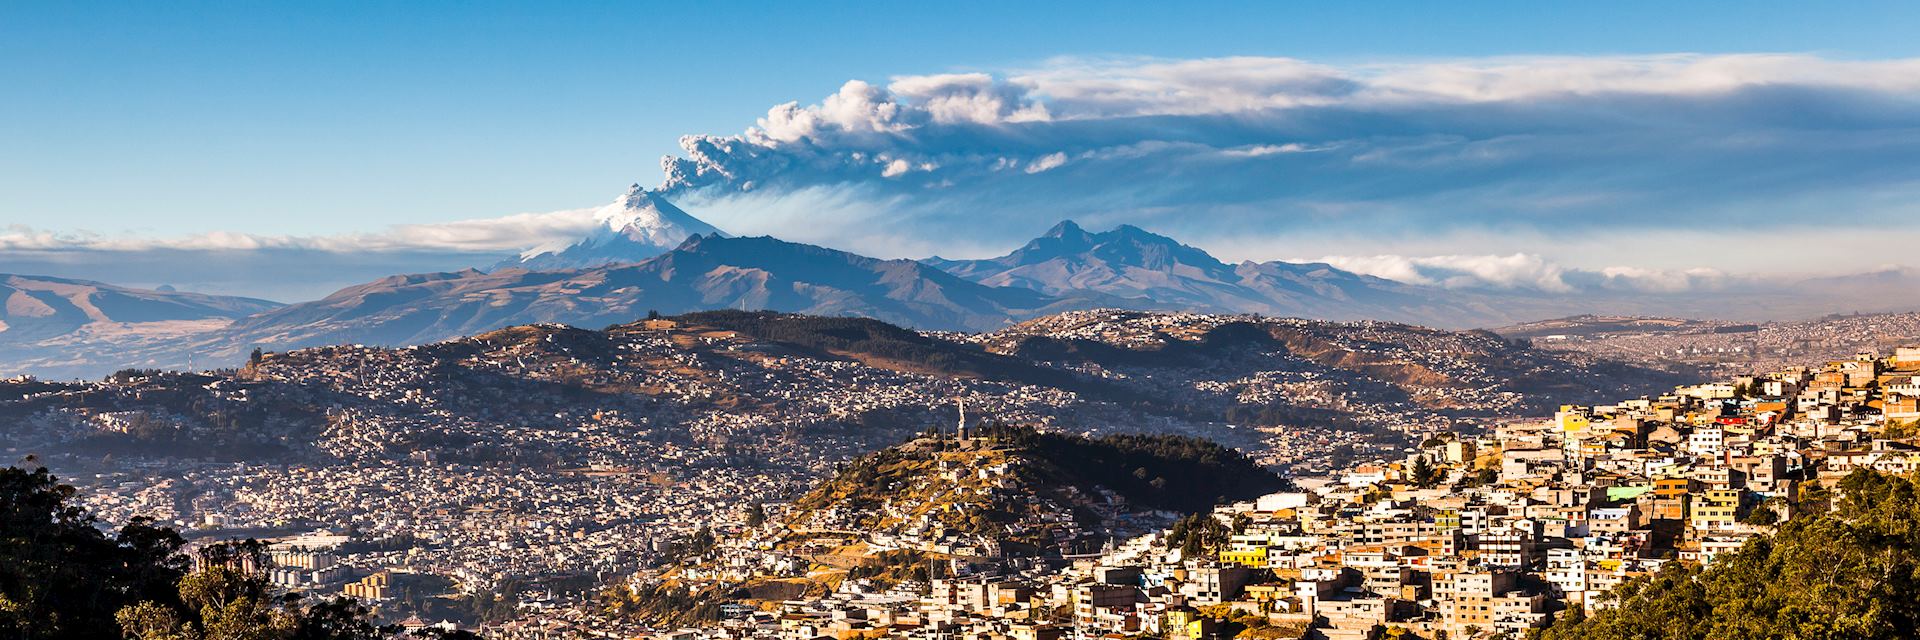 Quito with Cotopaxi Volcano in the background